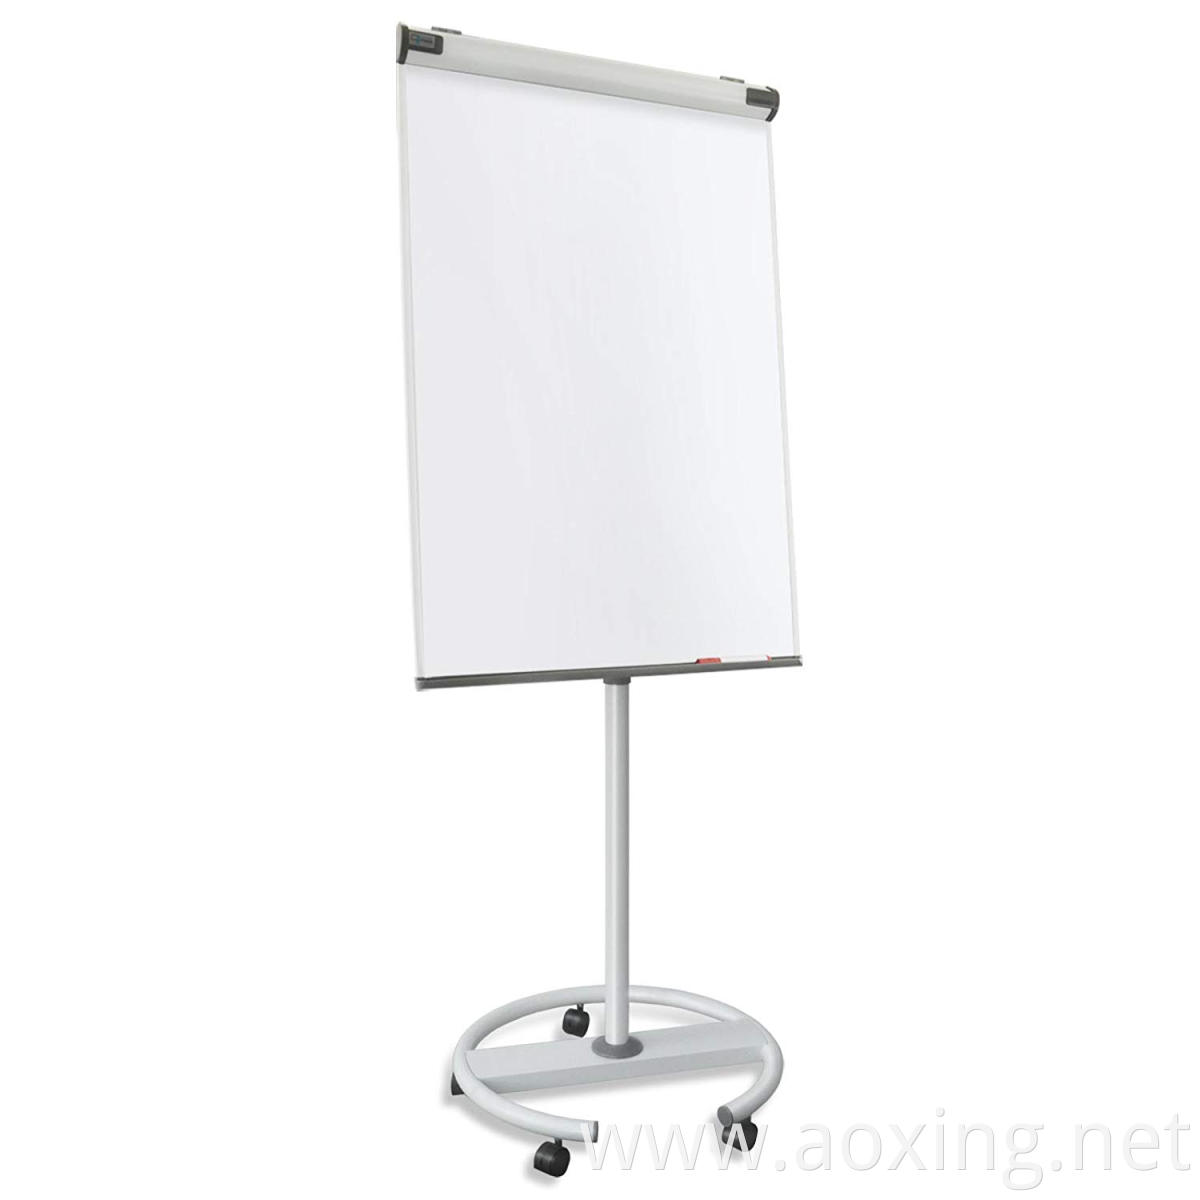 Flipchart Professional with Casters Frame with | Mobile and Versatile Folding Paper Holder Adjustable